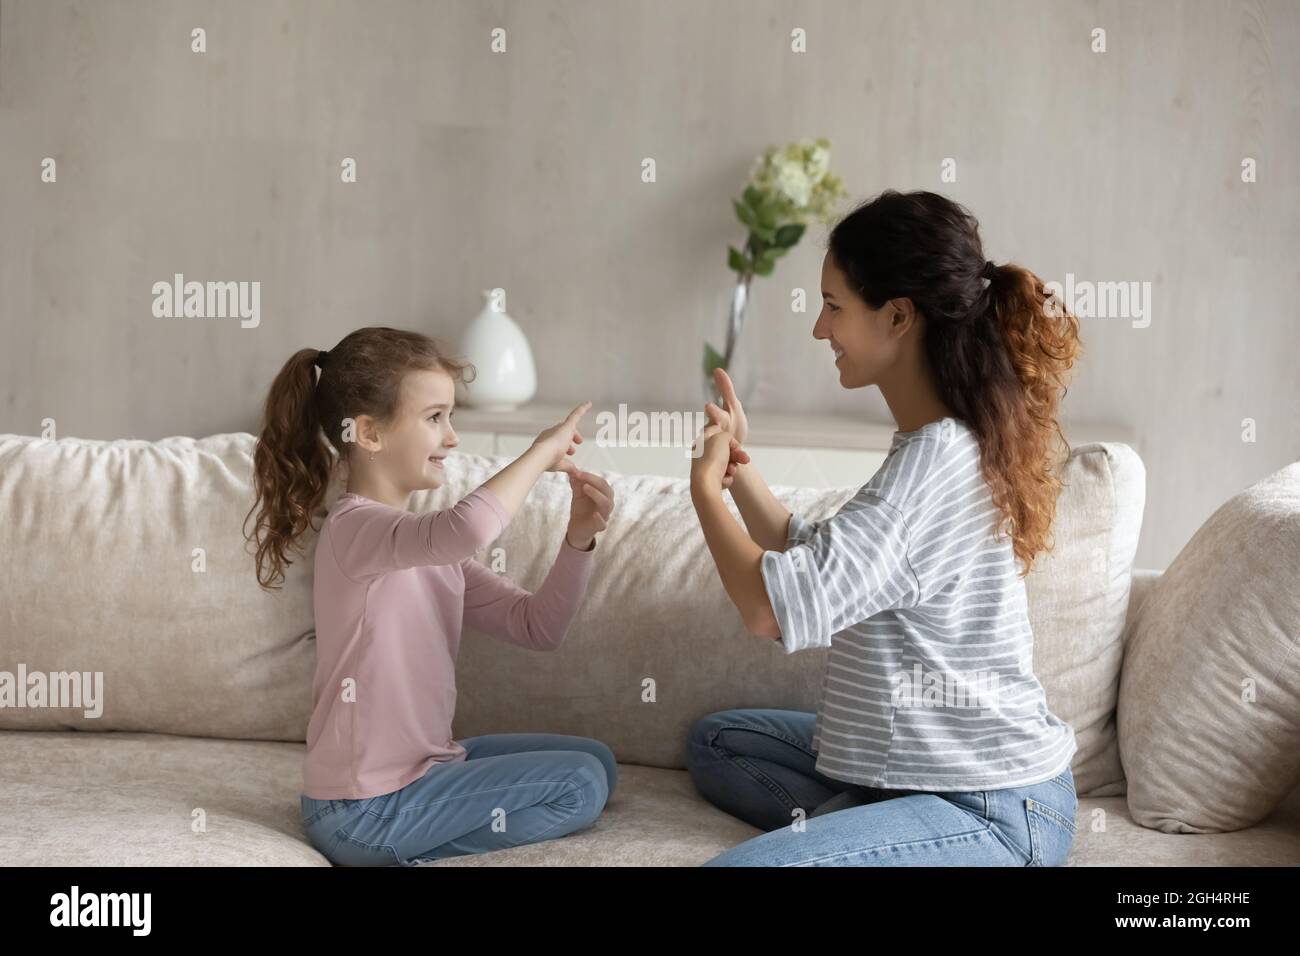 Adorable girl practicing communication with caring mum. Stock Photo